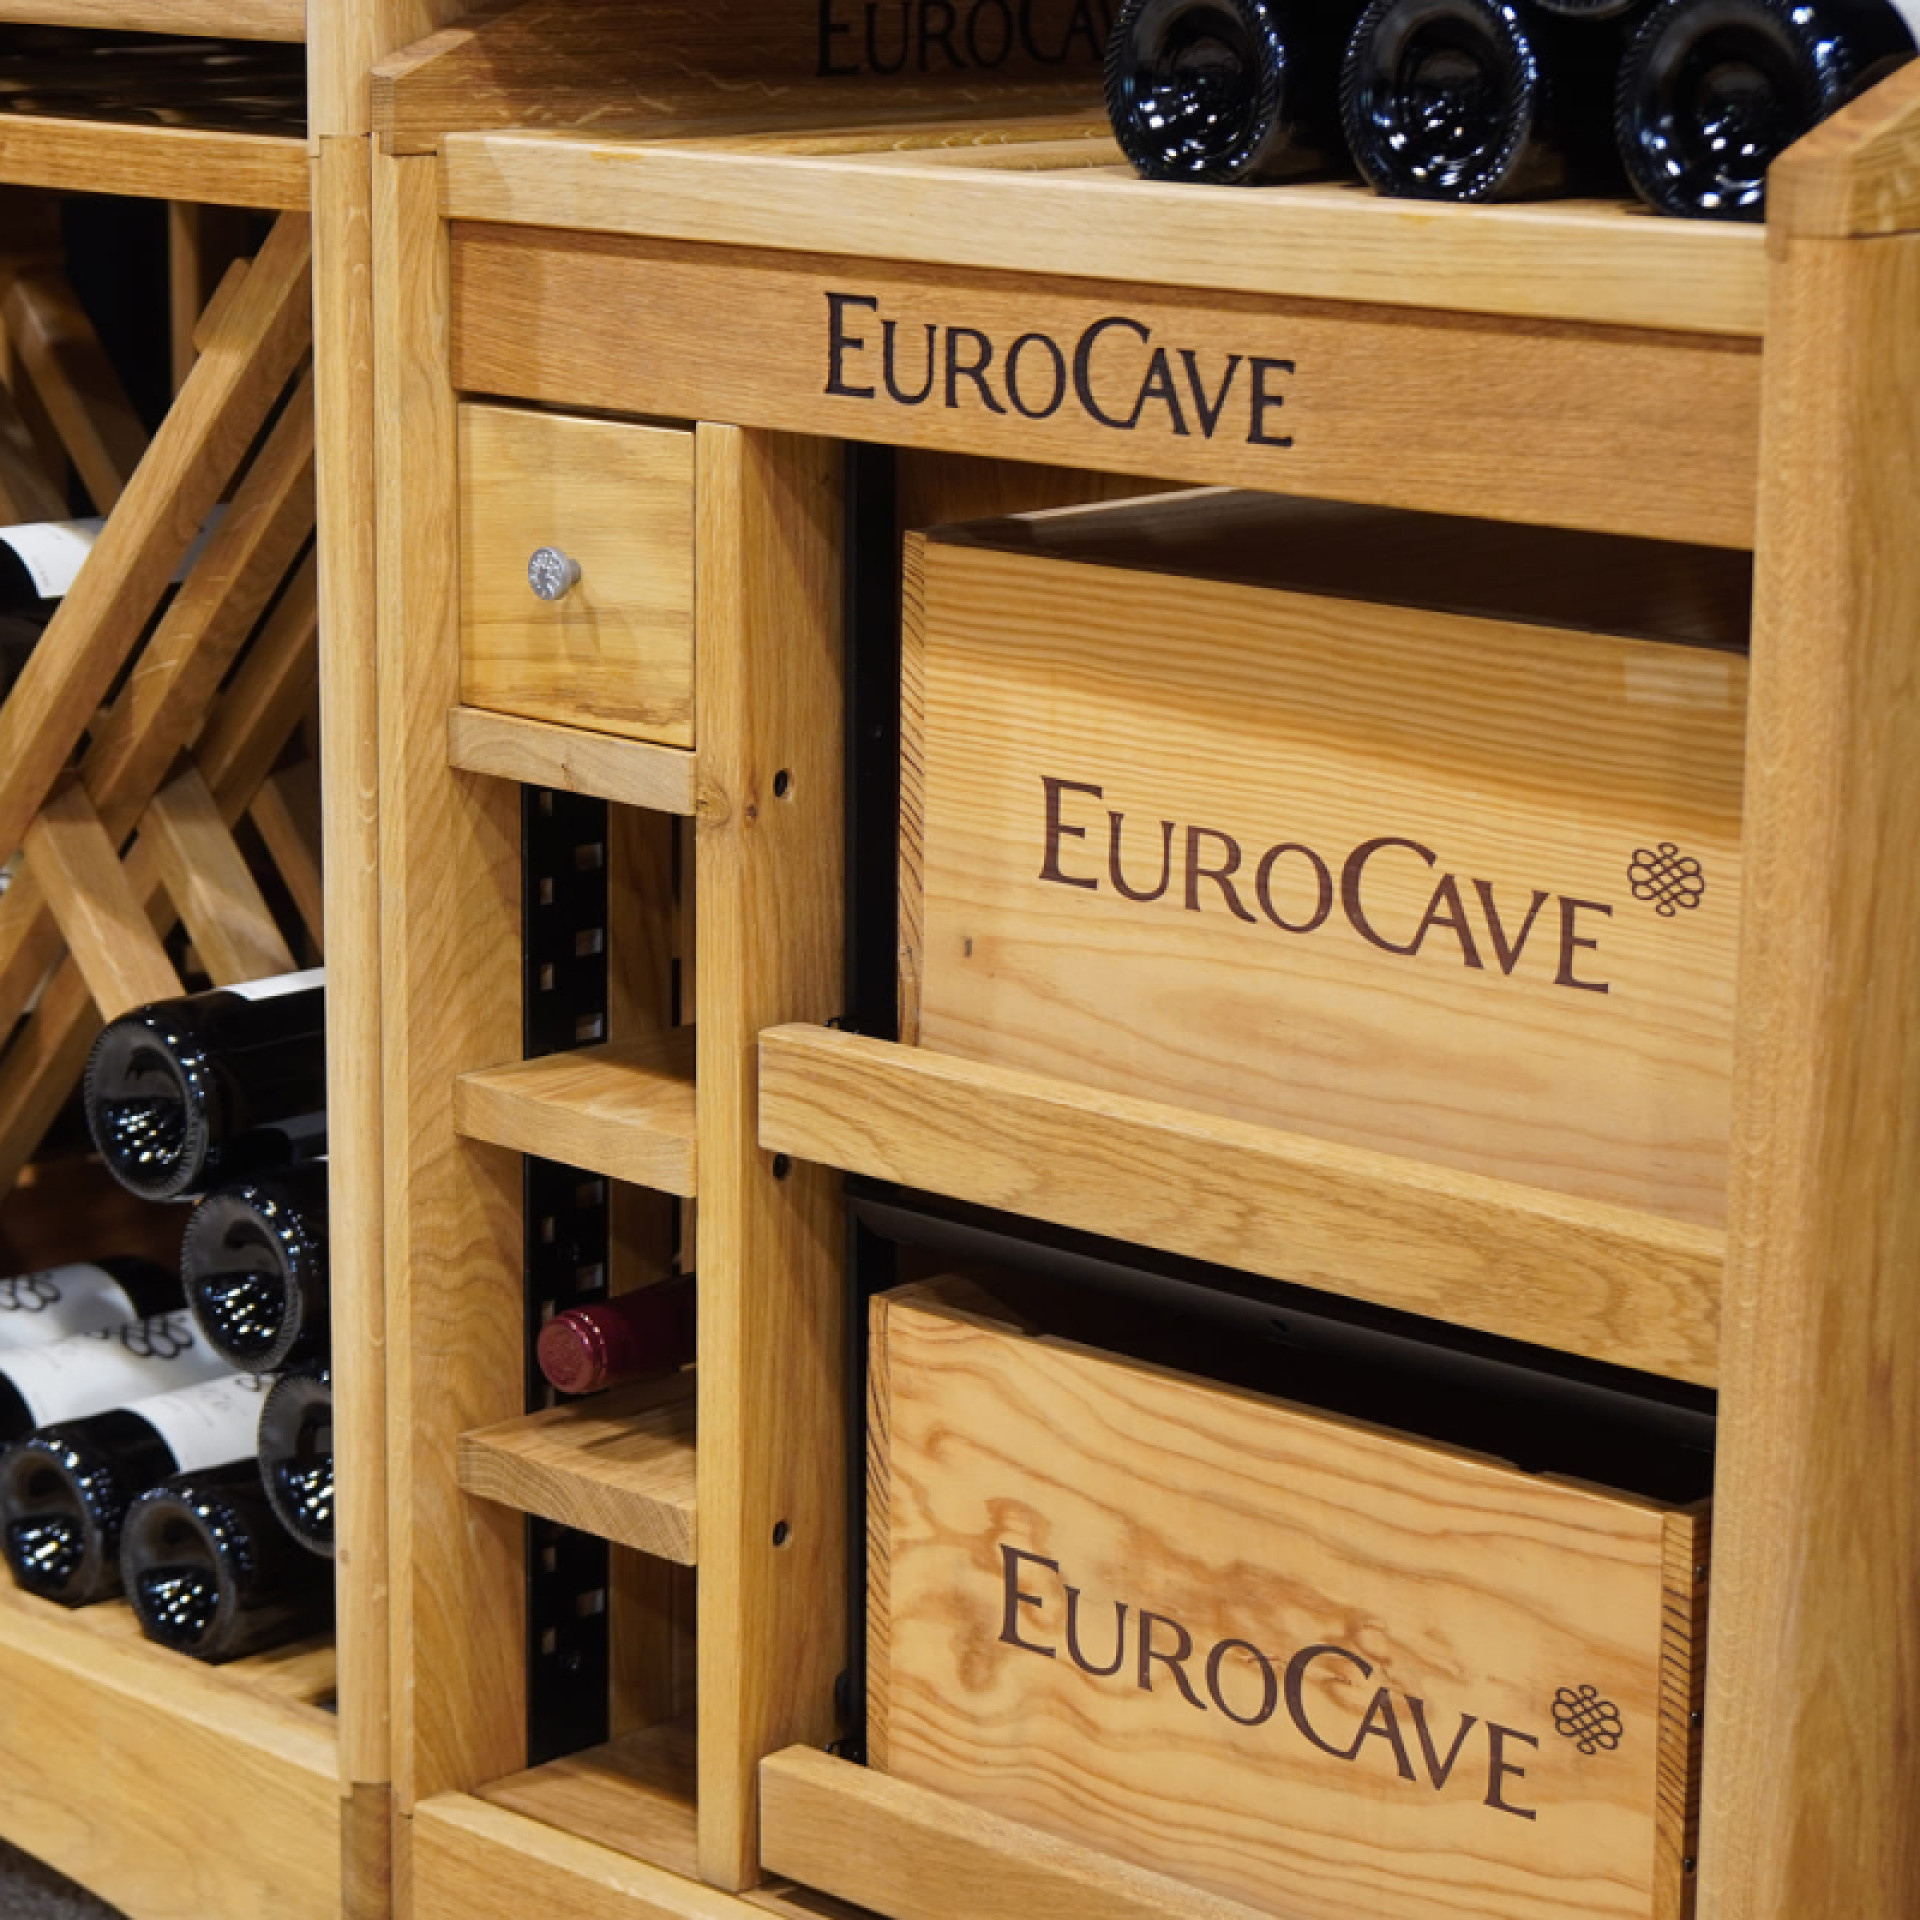 Rack module - Sliding wine rack to store 2 cases of wine and thus keep your wine bottles protected in their original case.